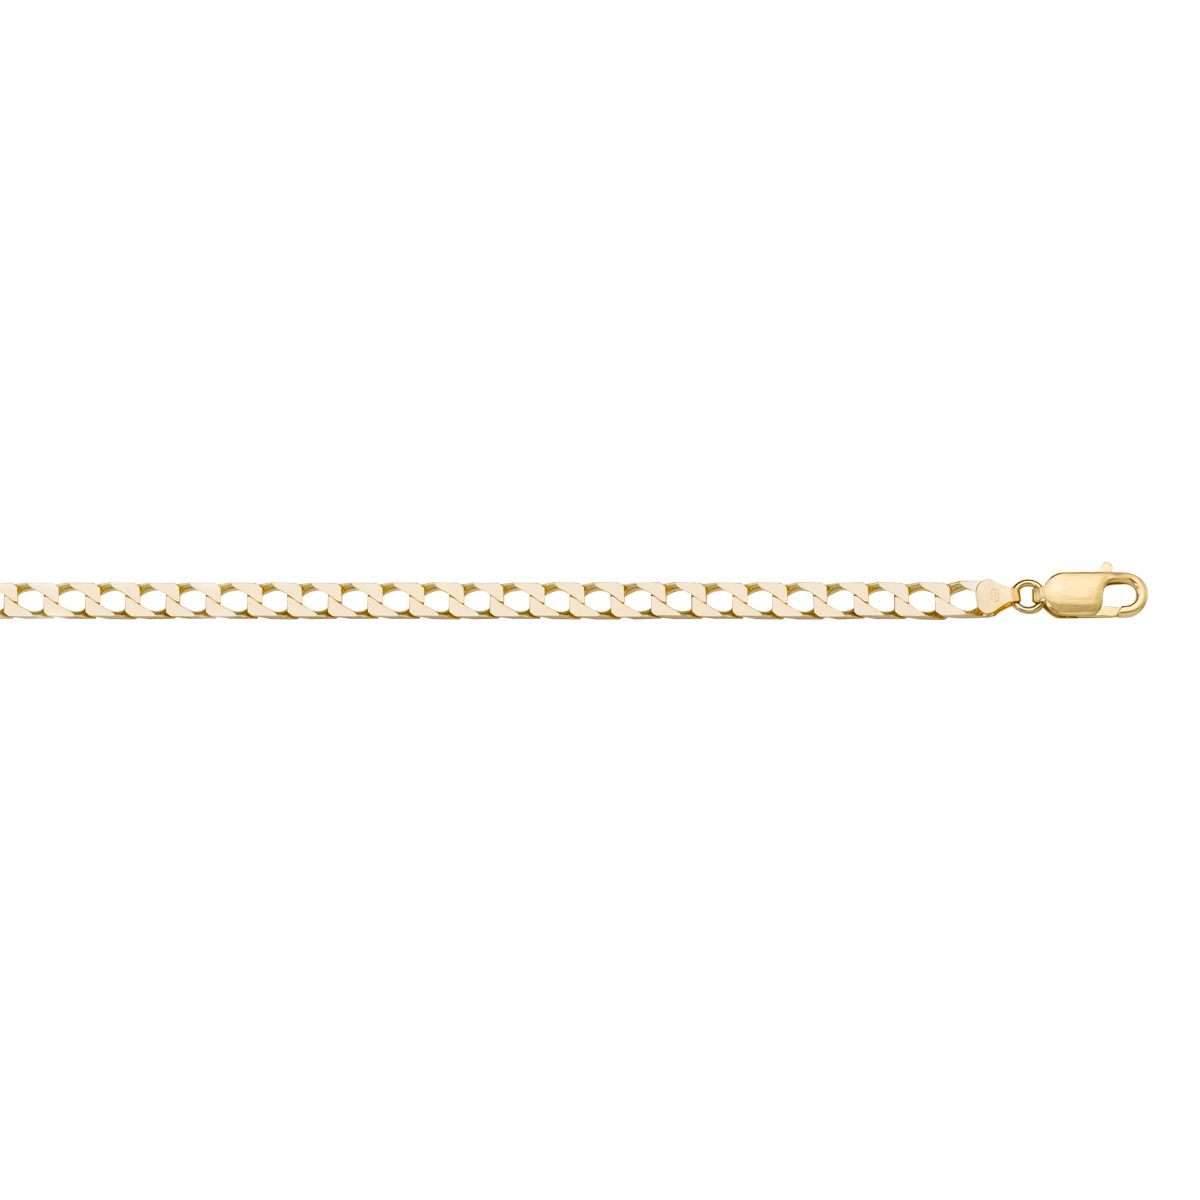 CCRB05, Gold Bracelet, Squared Curb, Yellow Gold